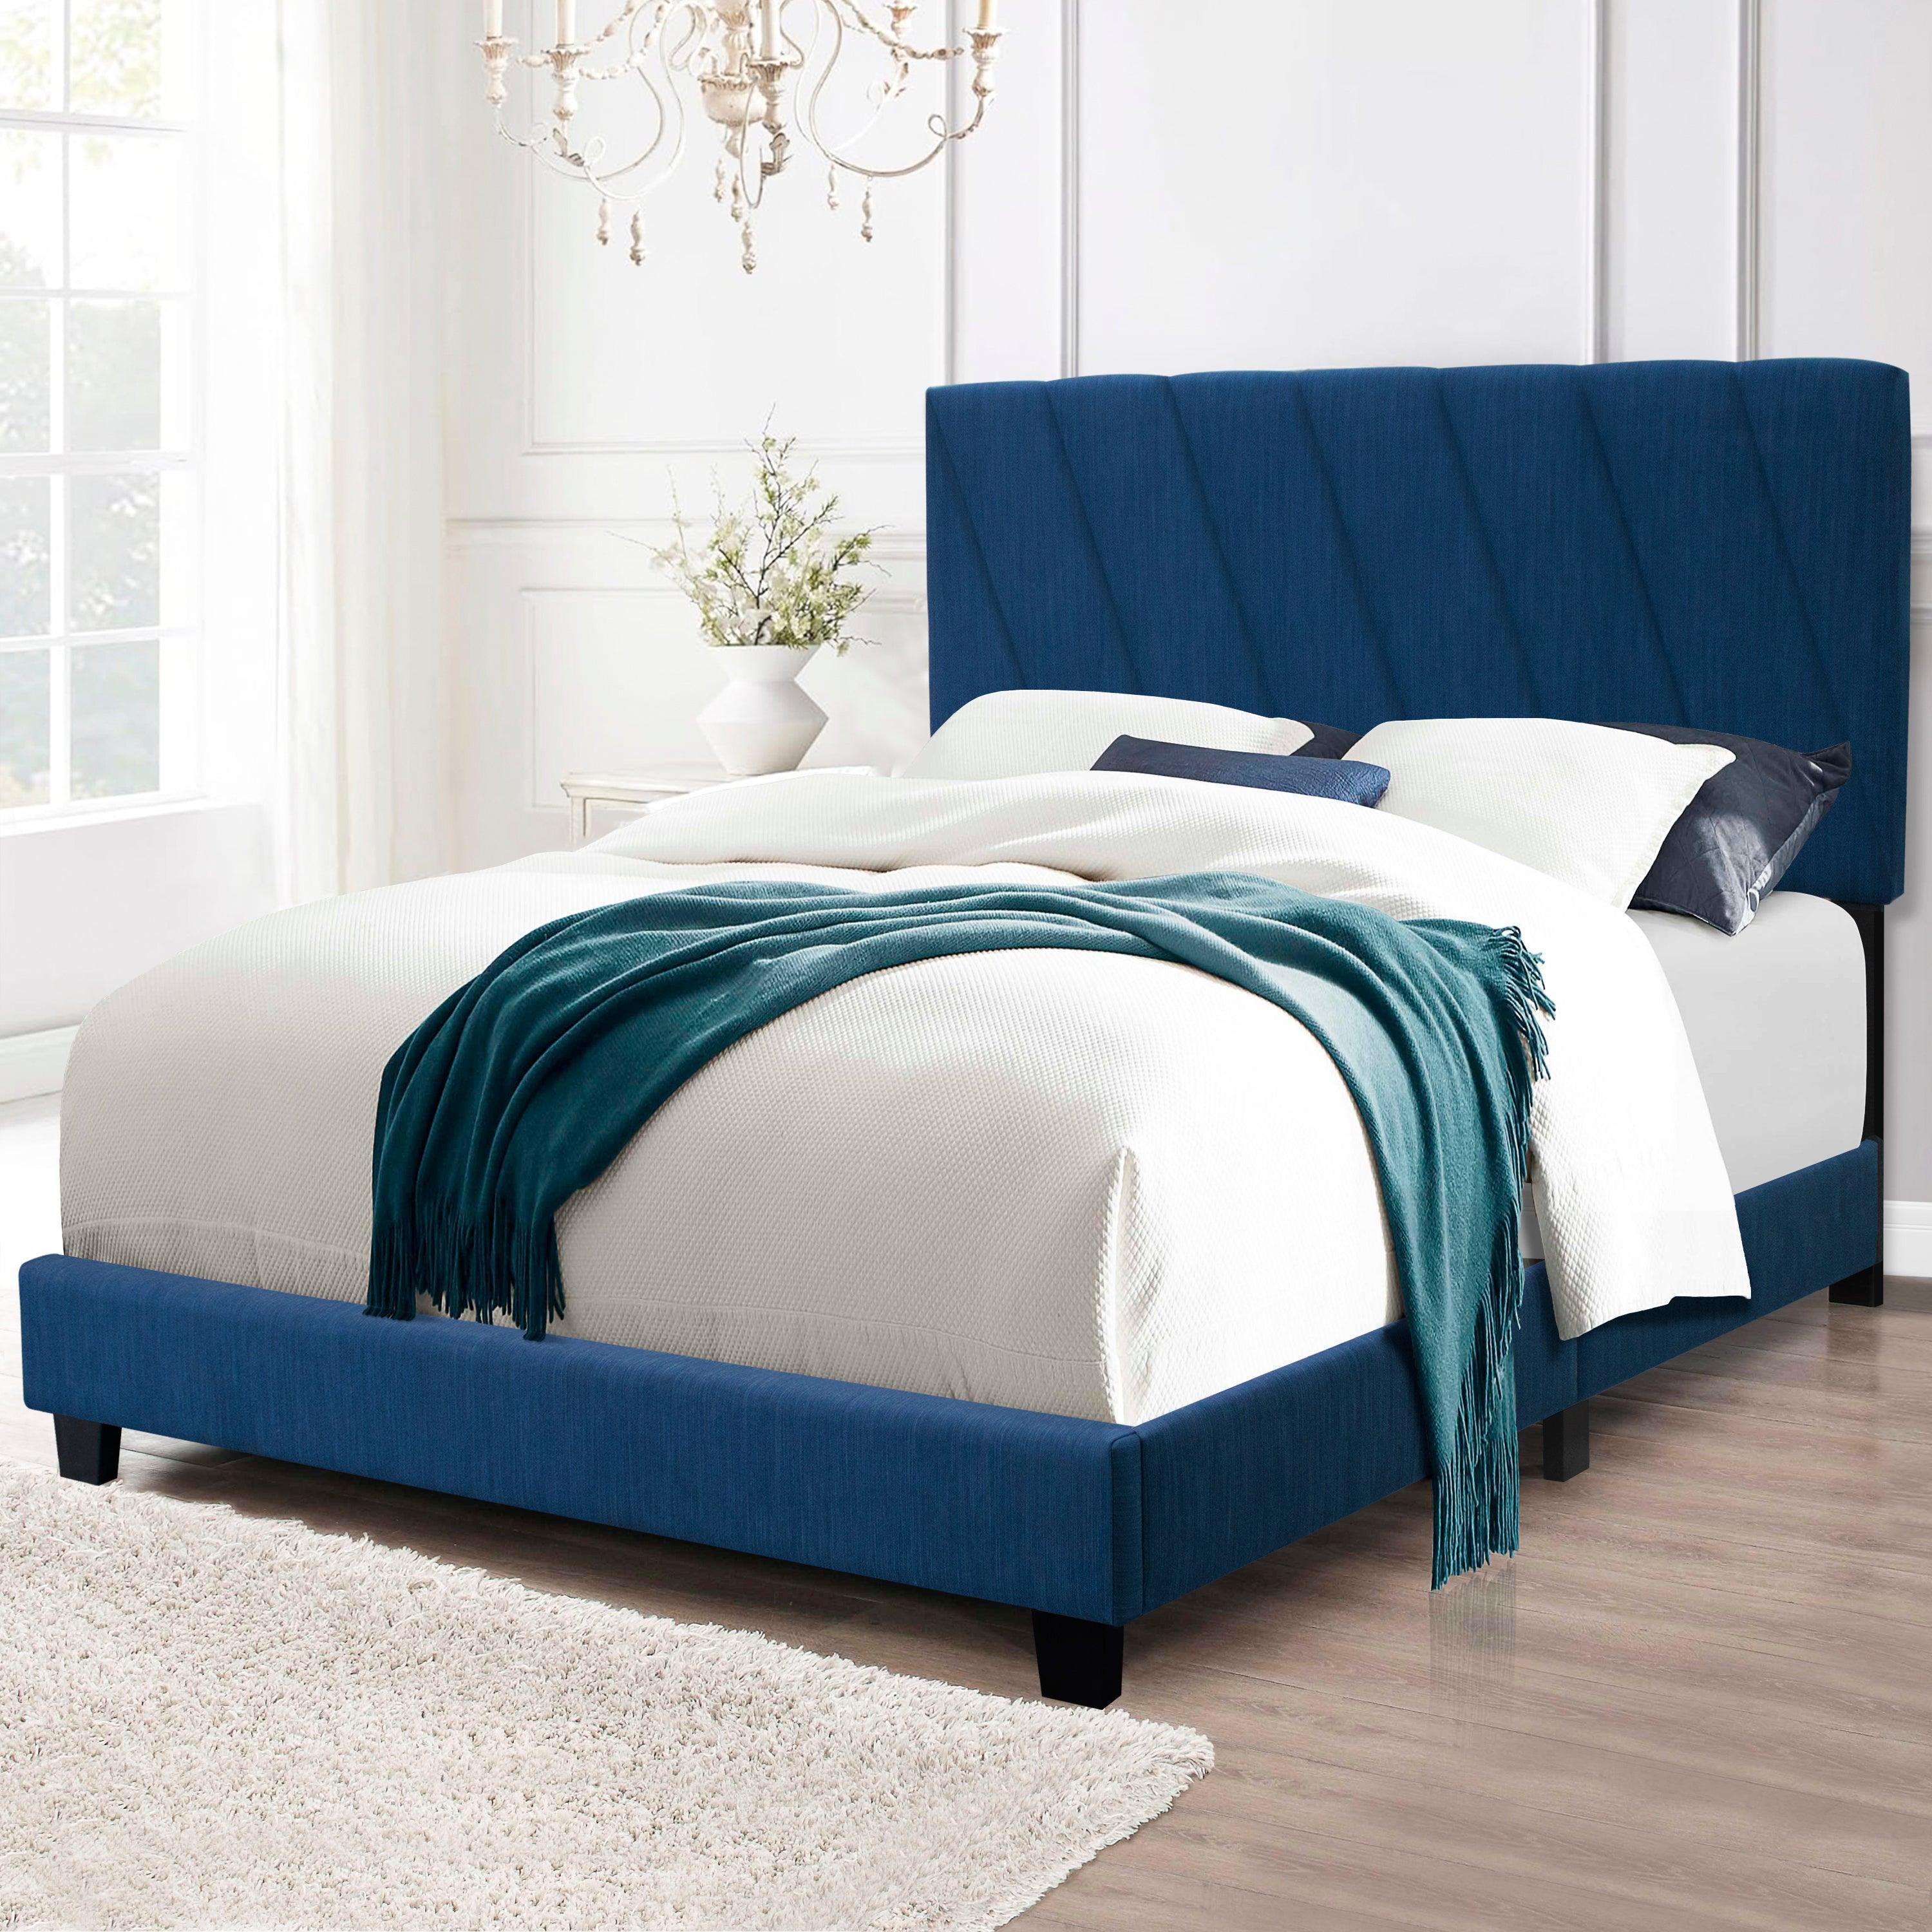 🆓🚛 Queen Adjustable Upholstered Bed Frame, Modern Minimalist Top Styles, Blue